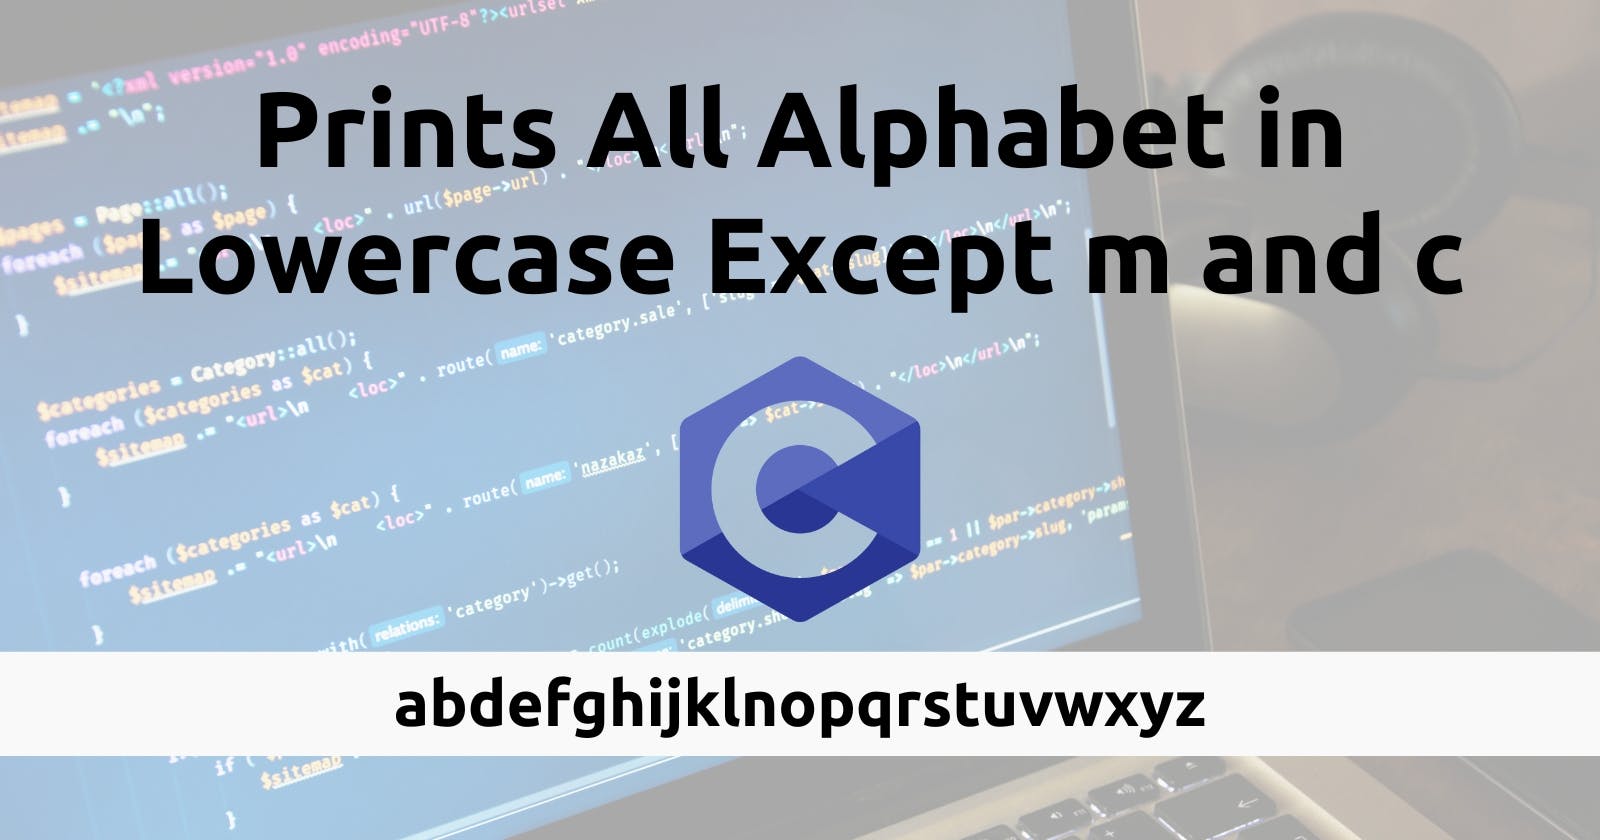 C Program to Print the Alphabet in Lowercase Except m and c